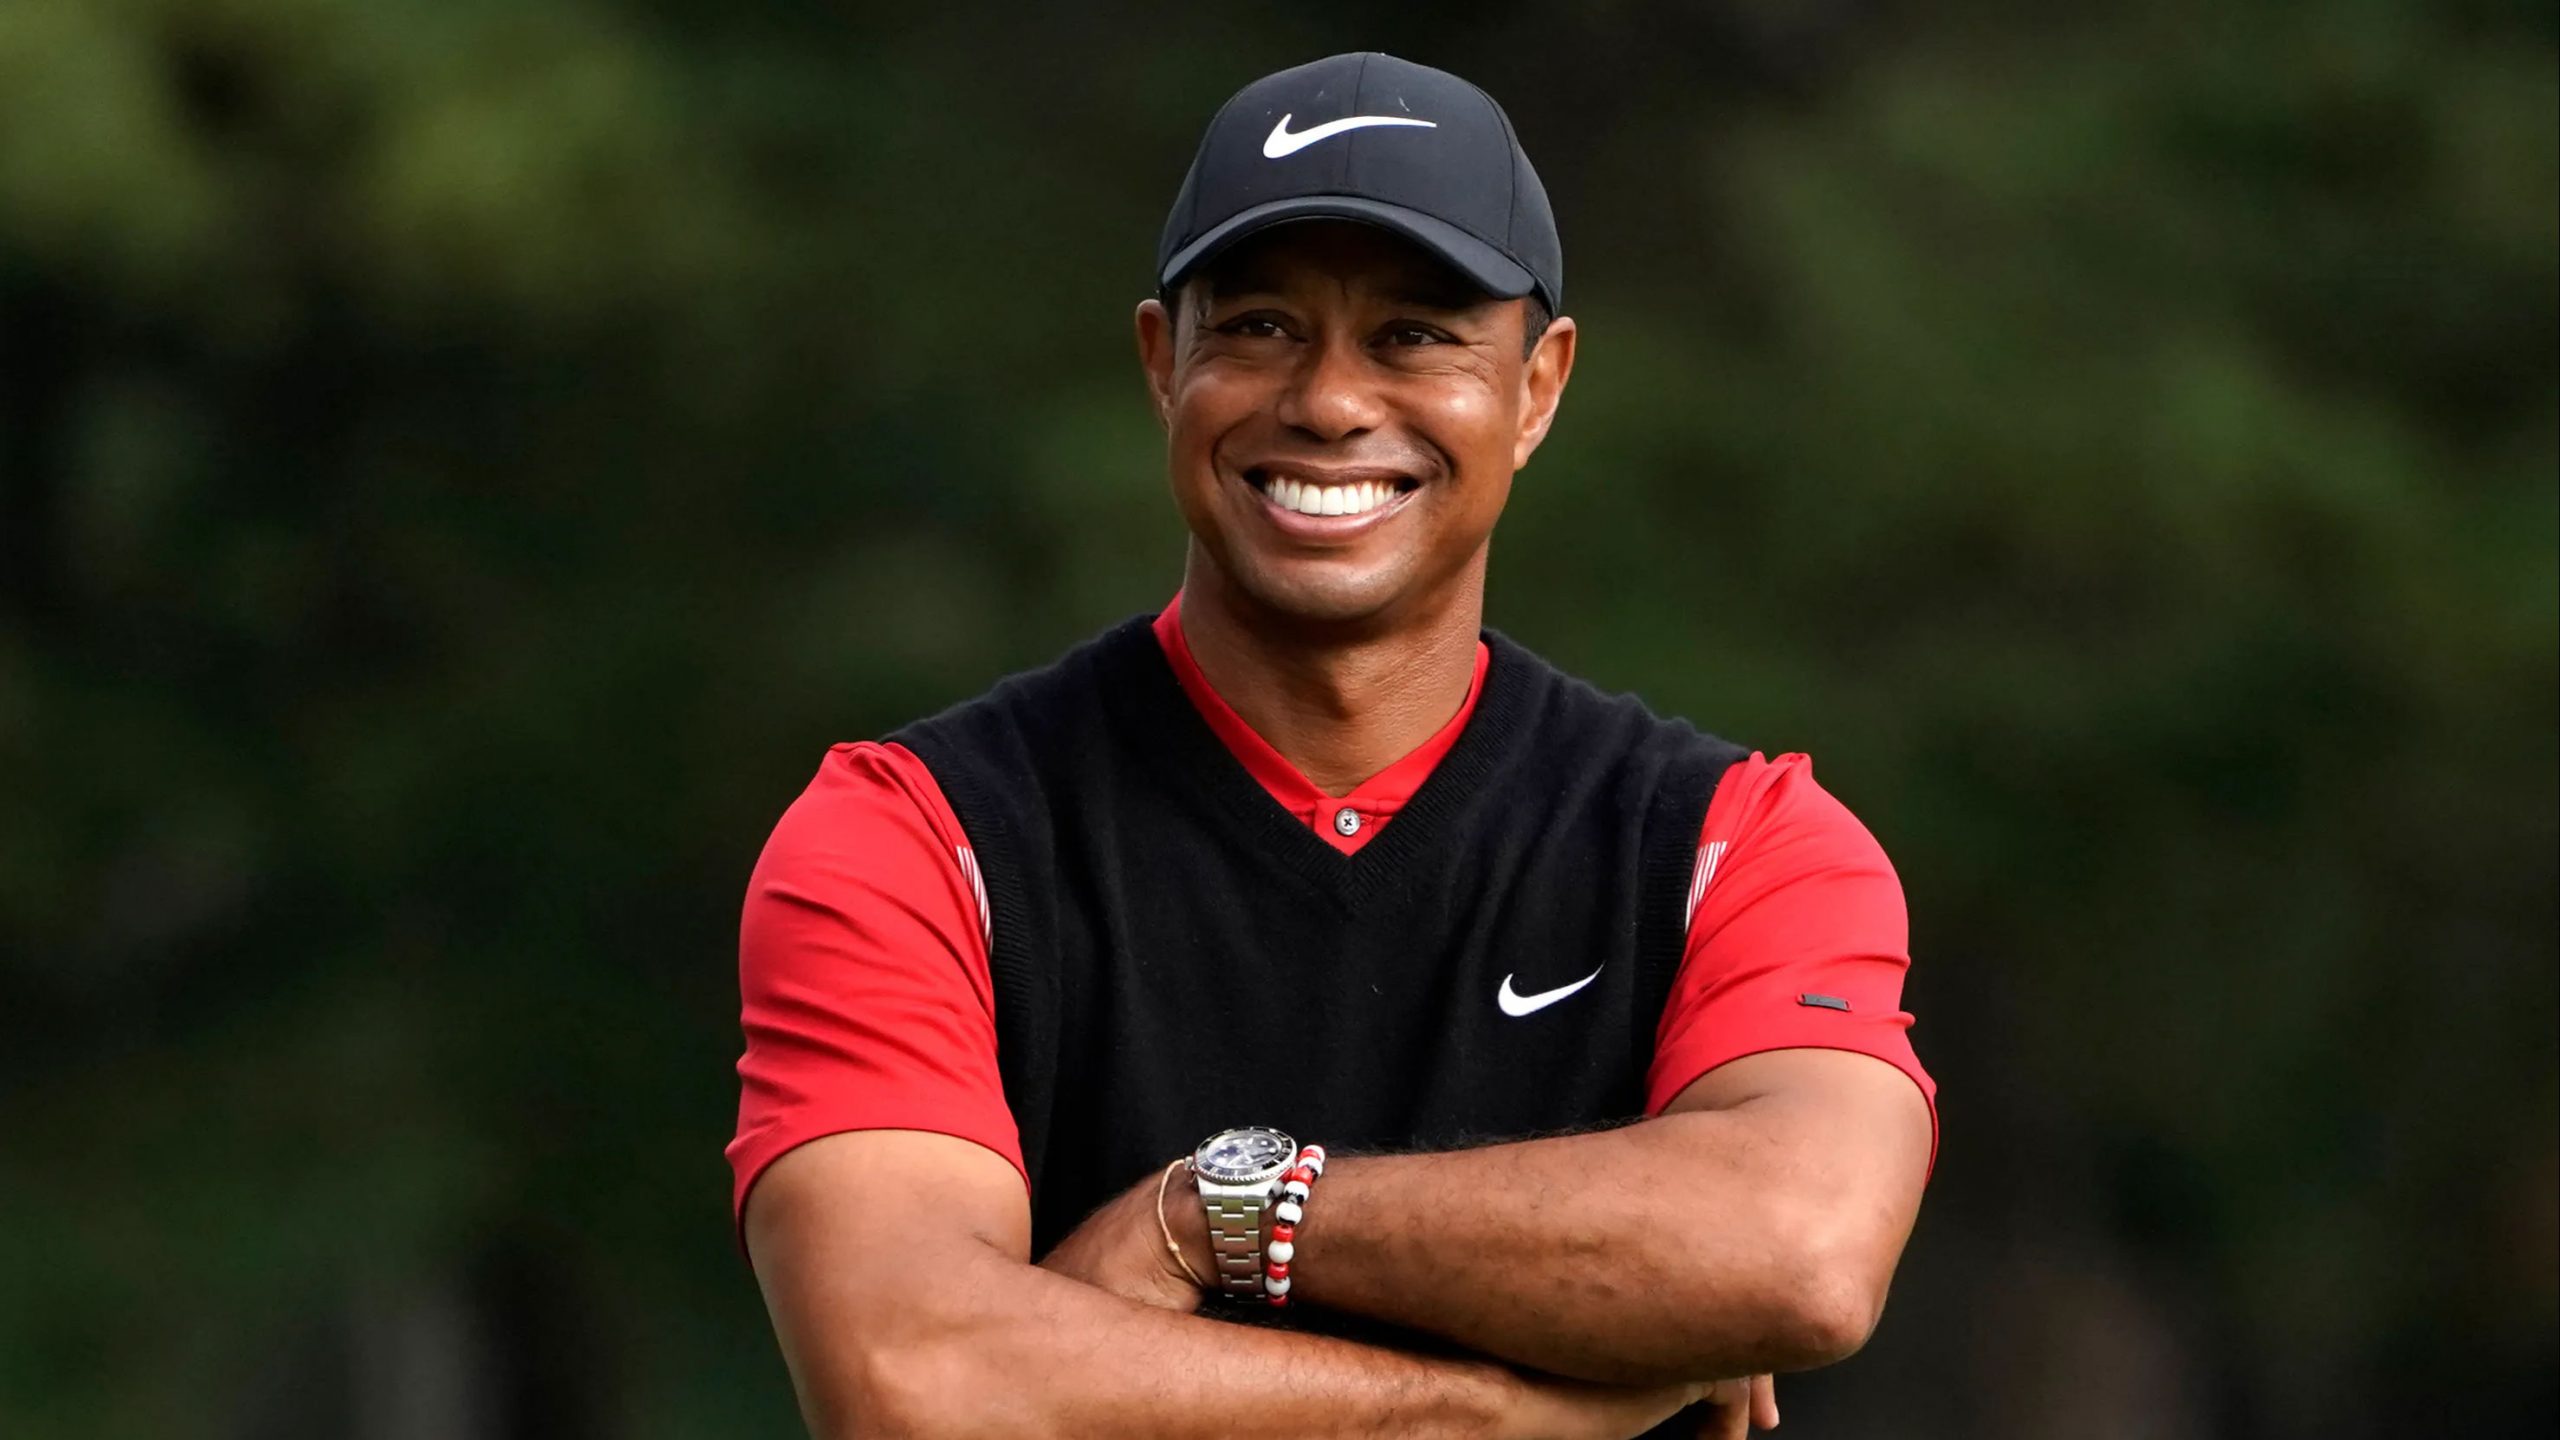 Tiger Woods edges towards recovery after surgery following car accident